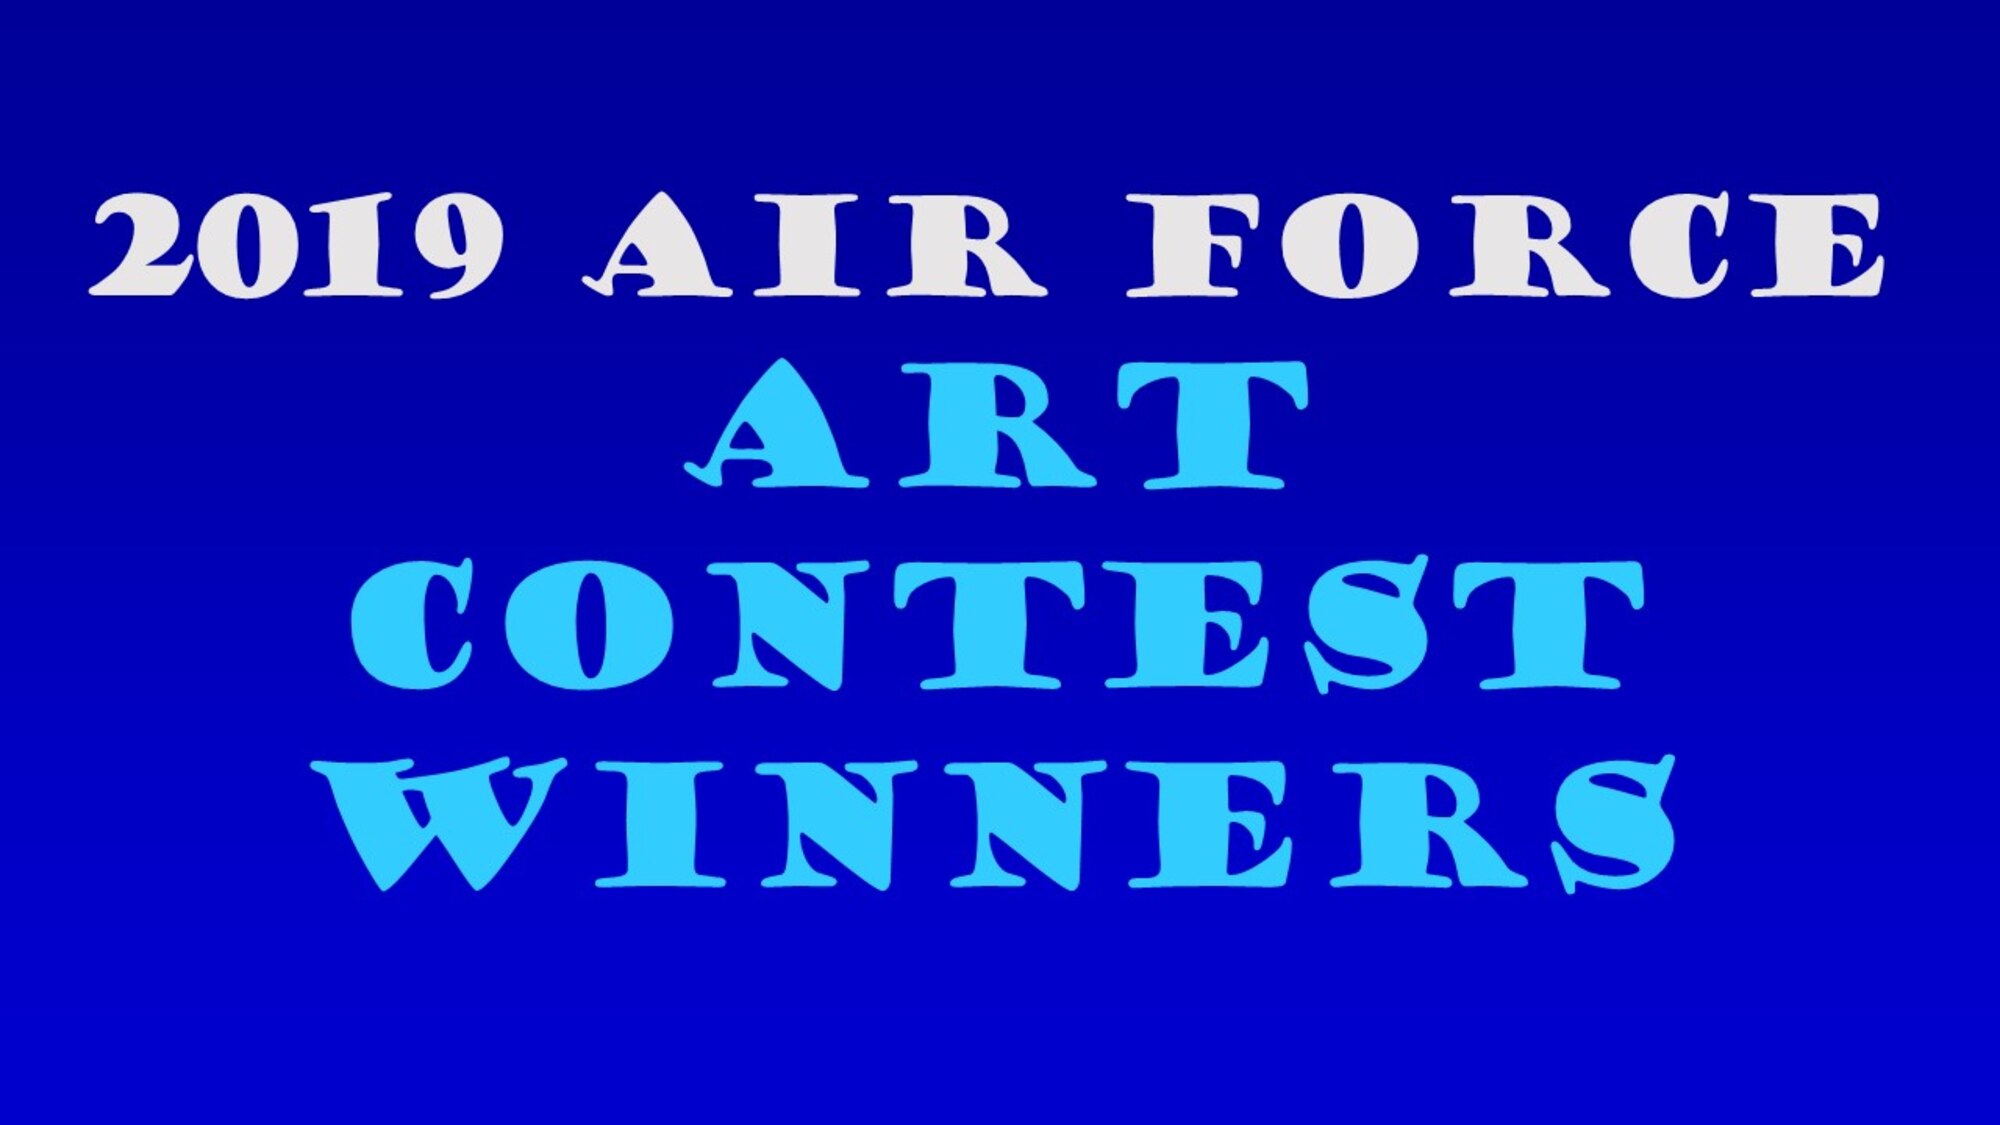 Cover photo to announce the winners of the 2019 Air Force Art Contest.